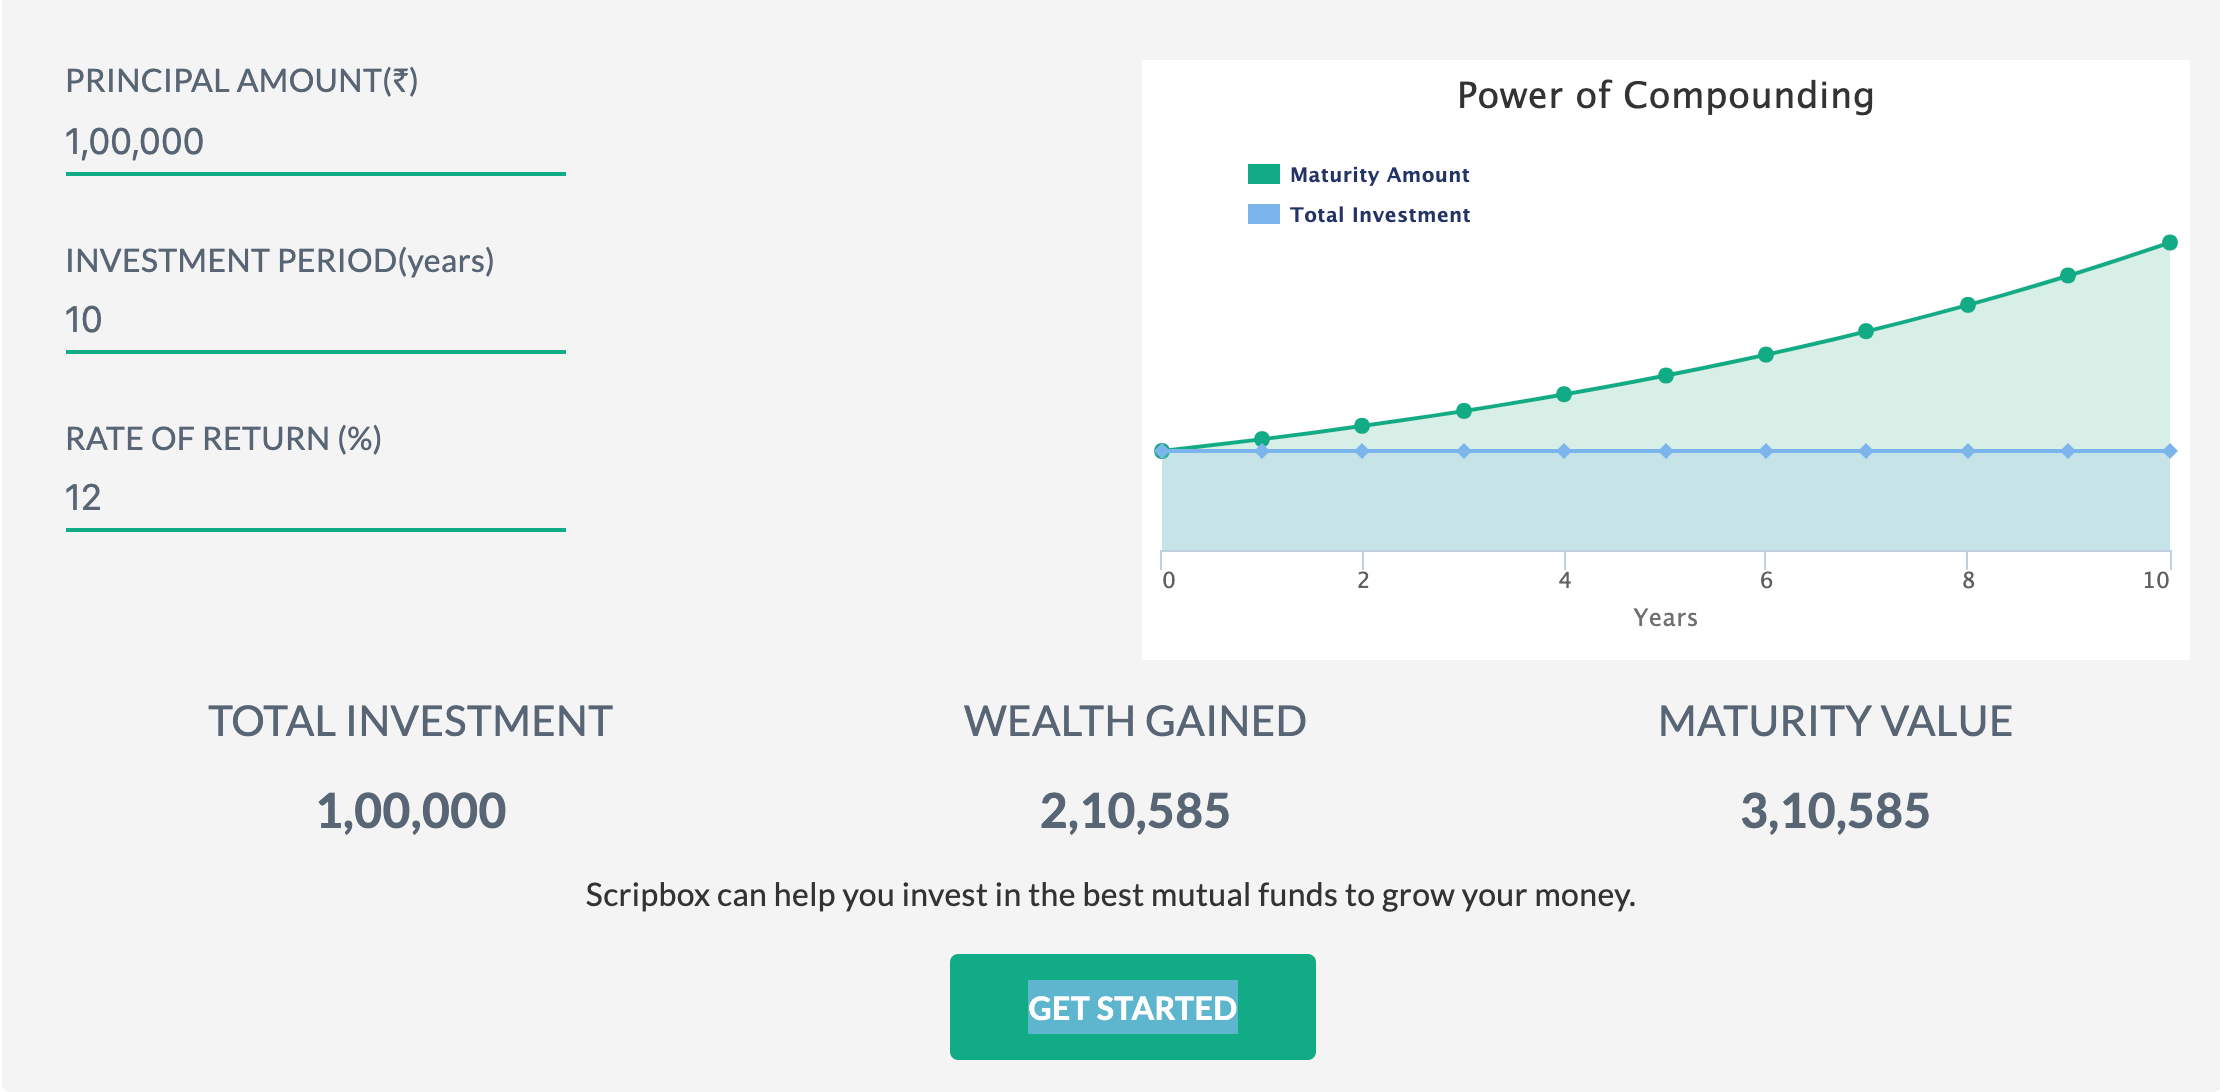 Compound Interest Calculator Calculate the Power of Compounding in